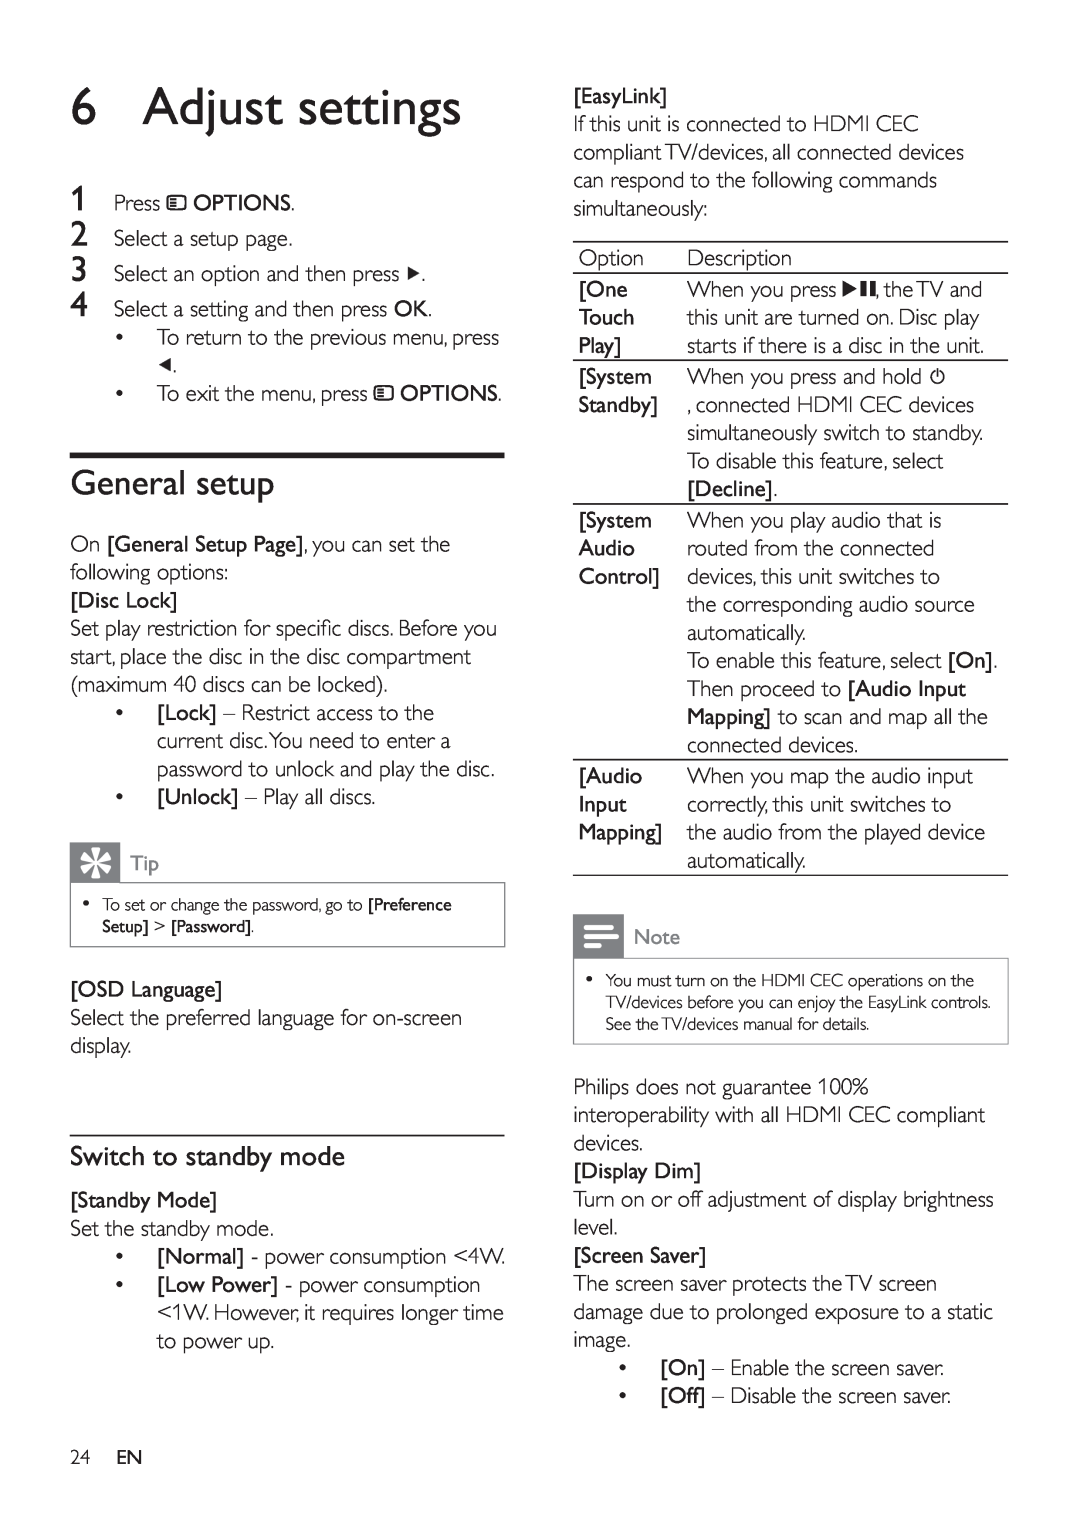 Philips HSB4383/12 user manual Adjust settings, General setup, Switch to standby mode 